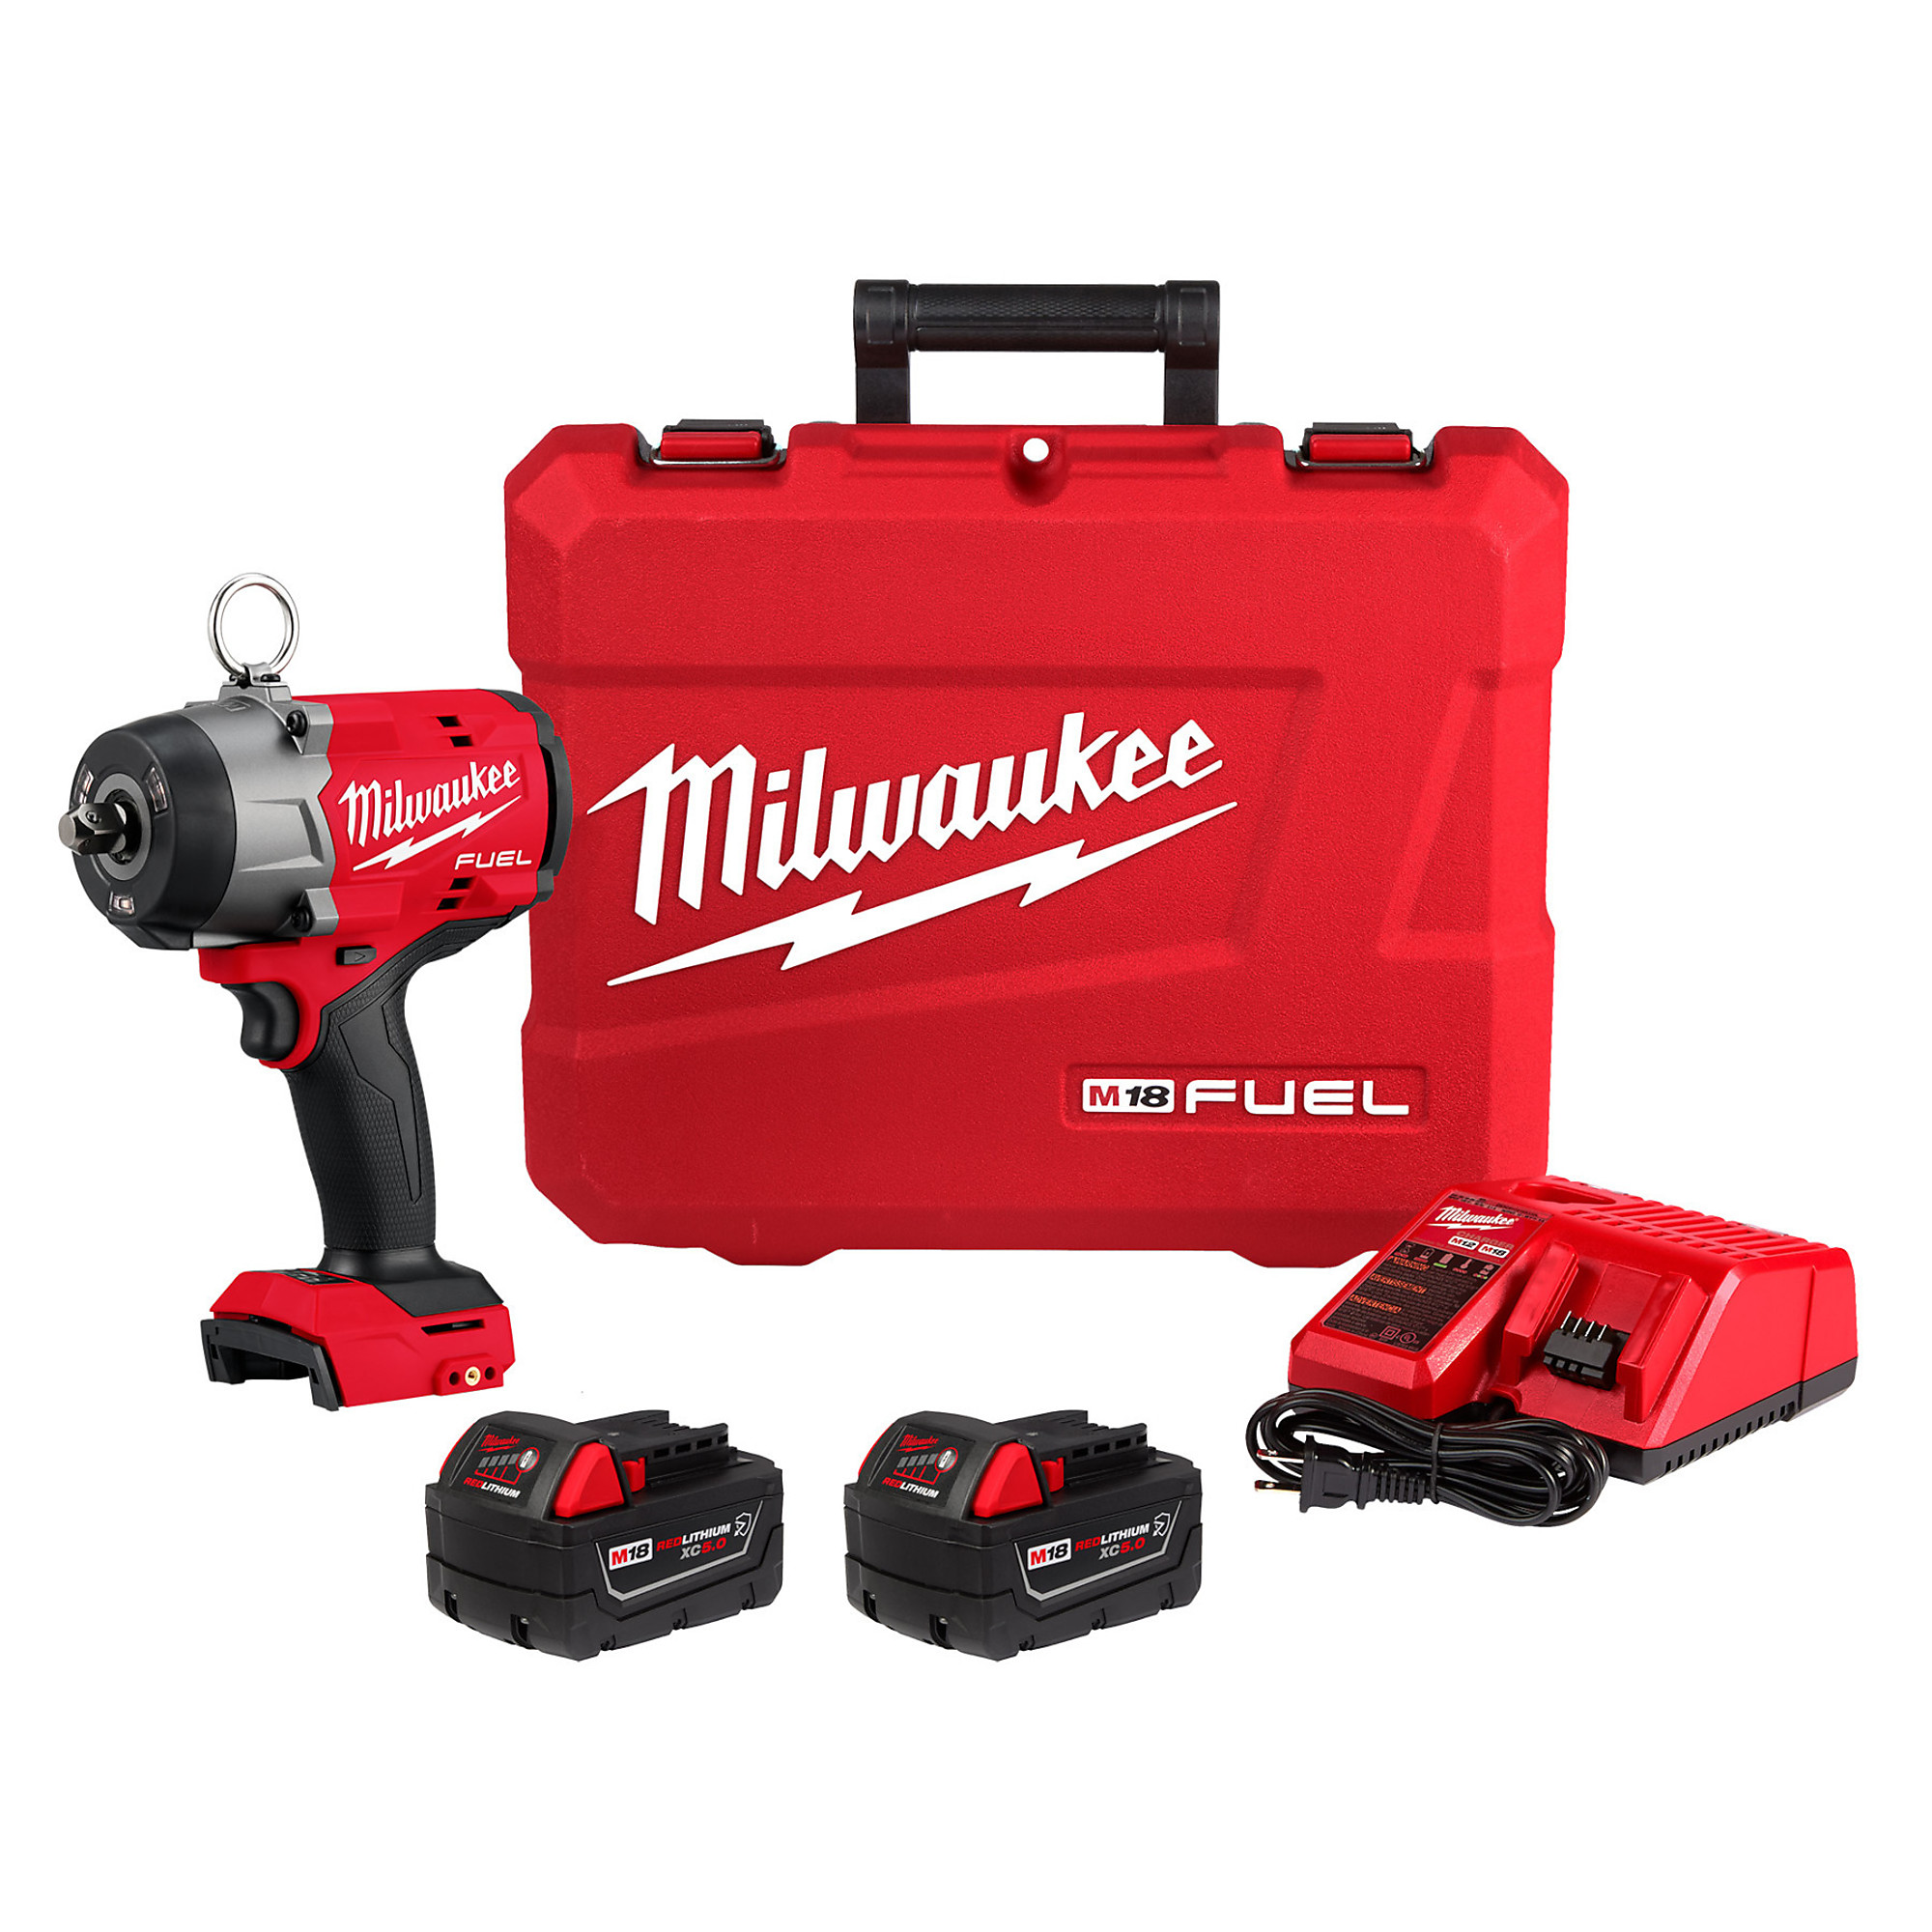 Milwaukee, M18 1/2Inch High Torque Impact Wrench PinDetentKit, Drive Size 1/2 in, Volts 18 Battery Type Lithium-ion, Model 2966-22